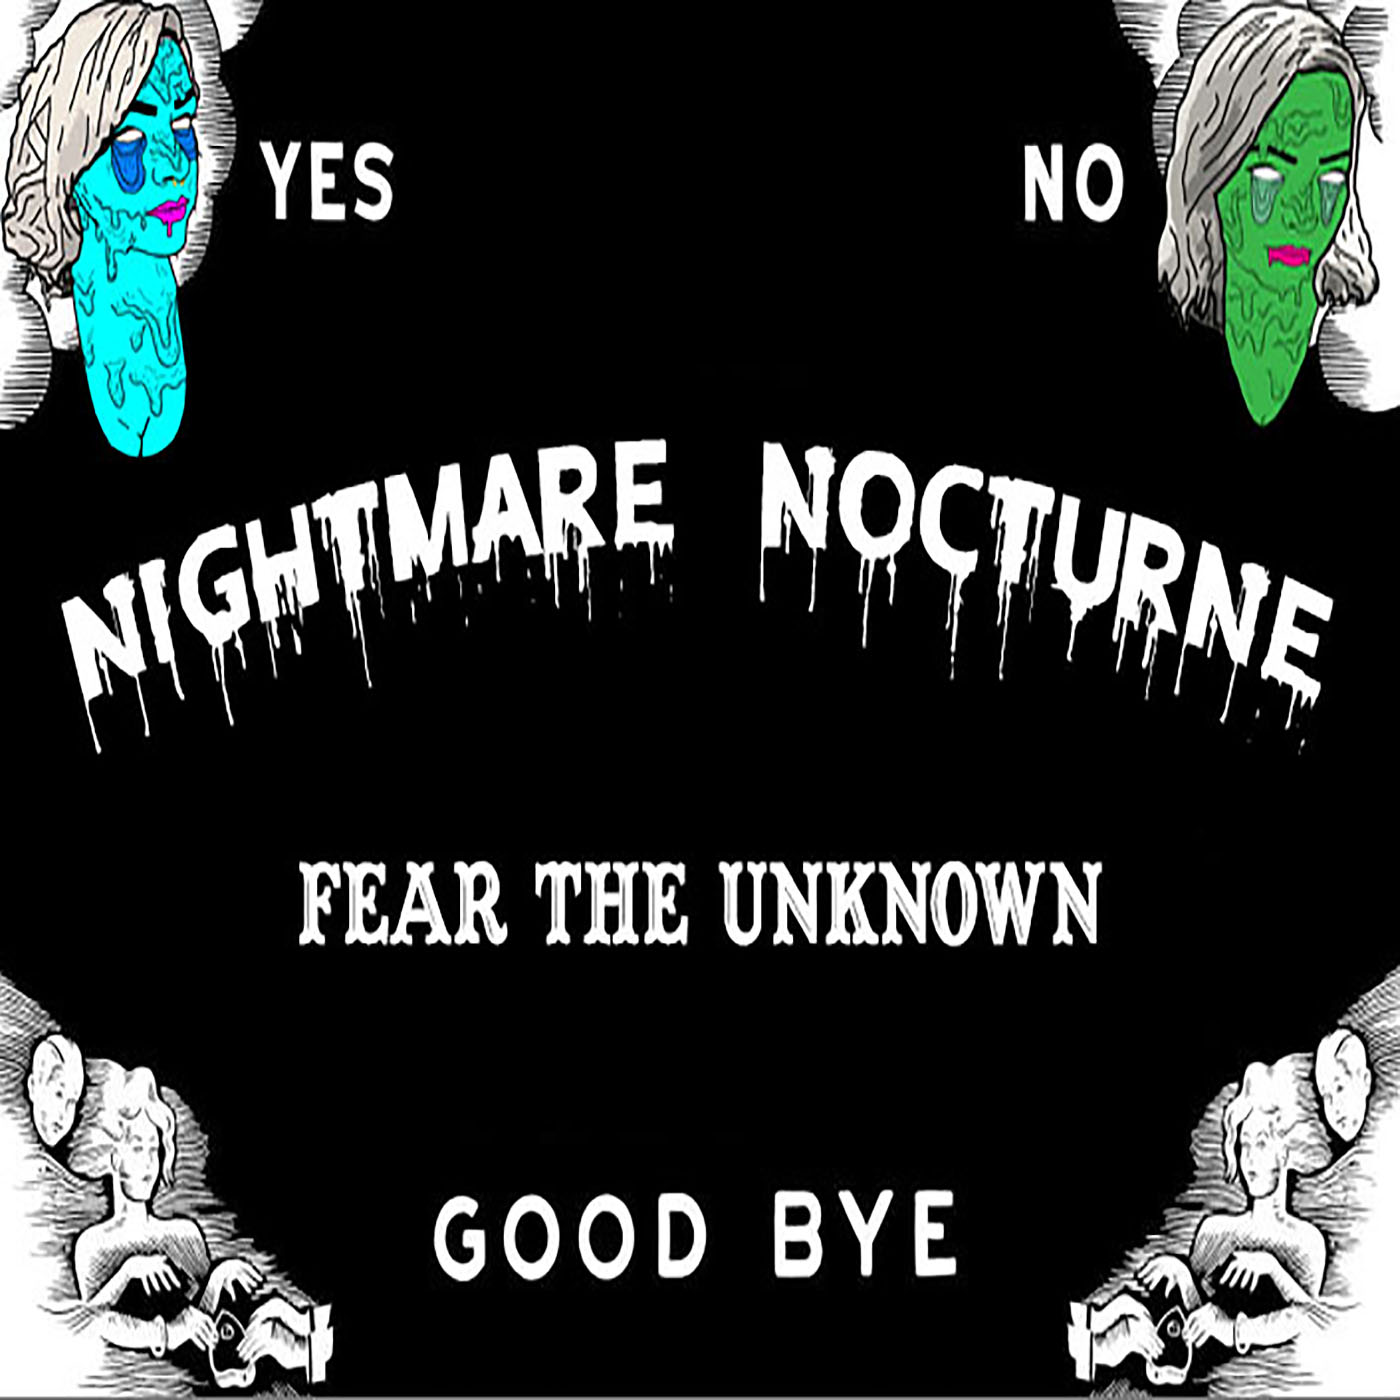 Nightmare Nocturne Review